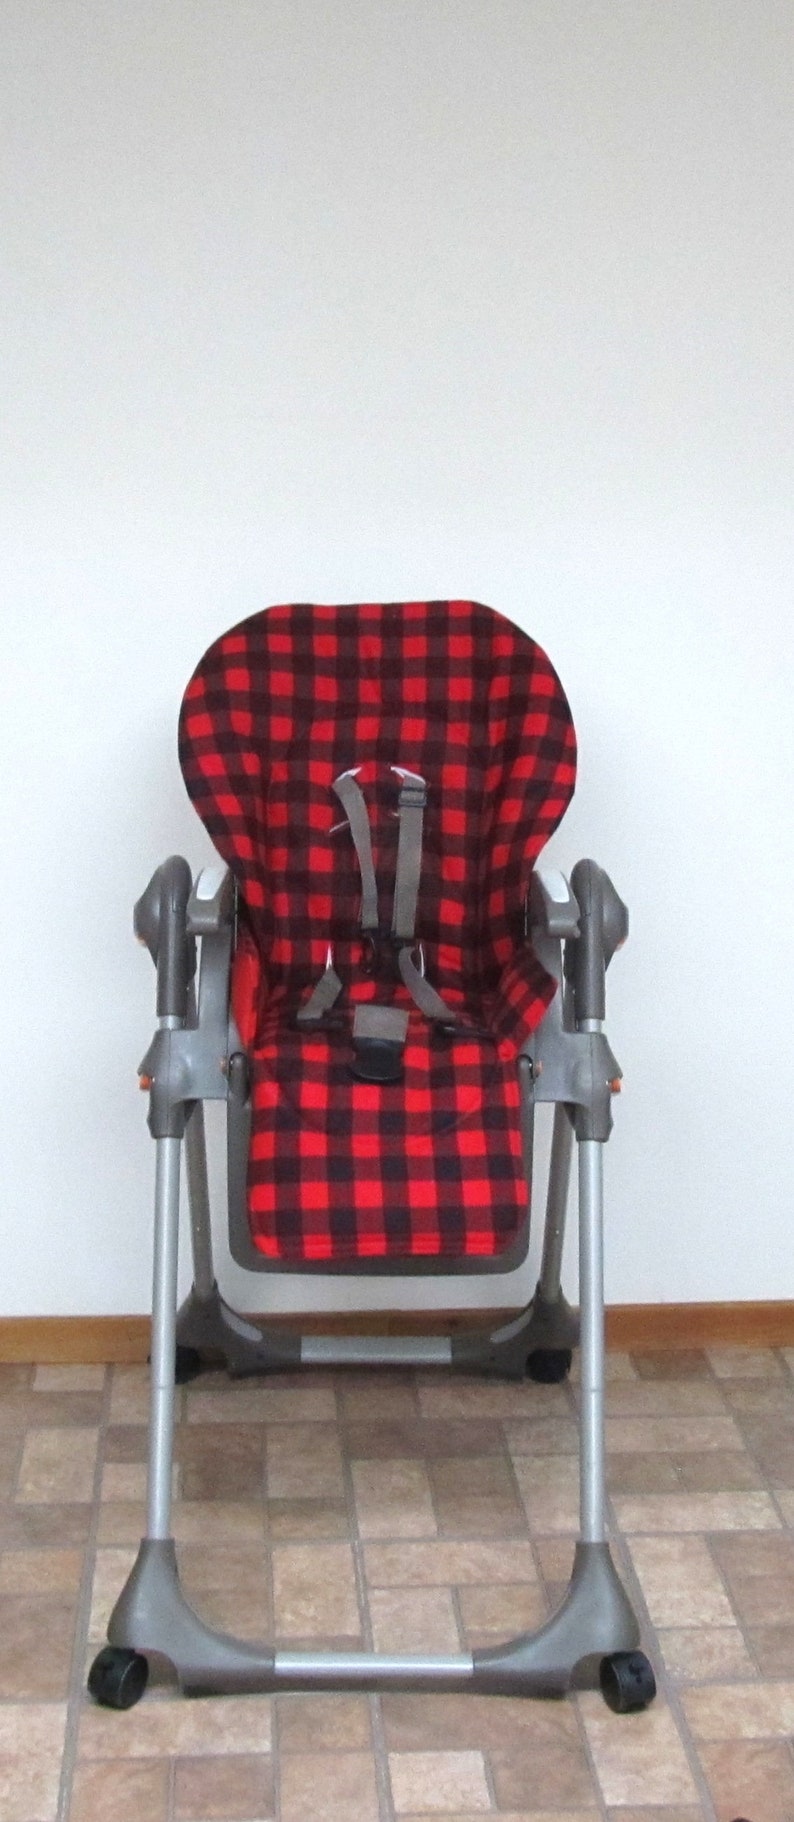 Red And Black Buffalo Plaid High Chair Replacement Pad Fits Etsy